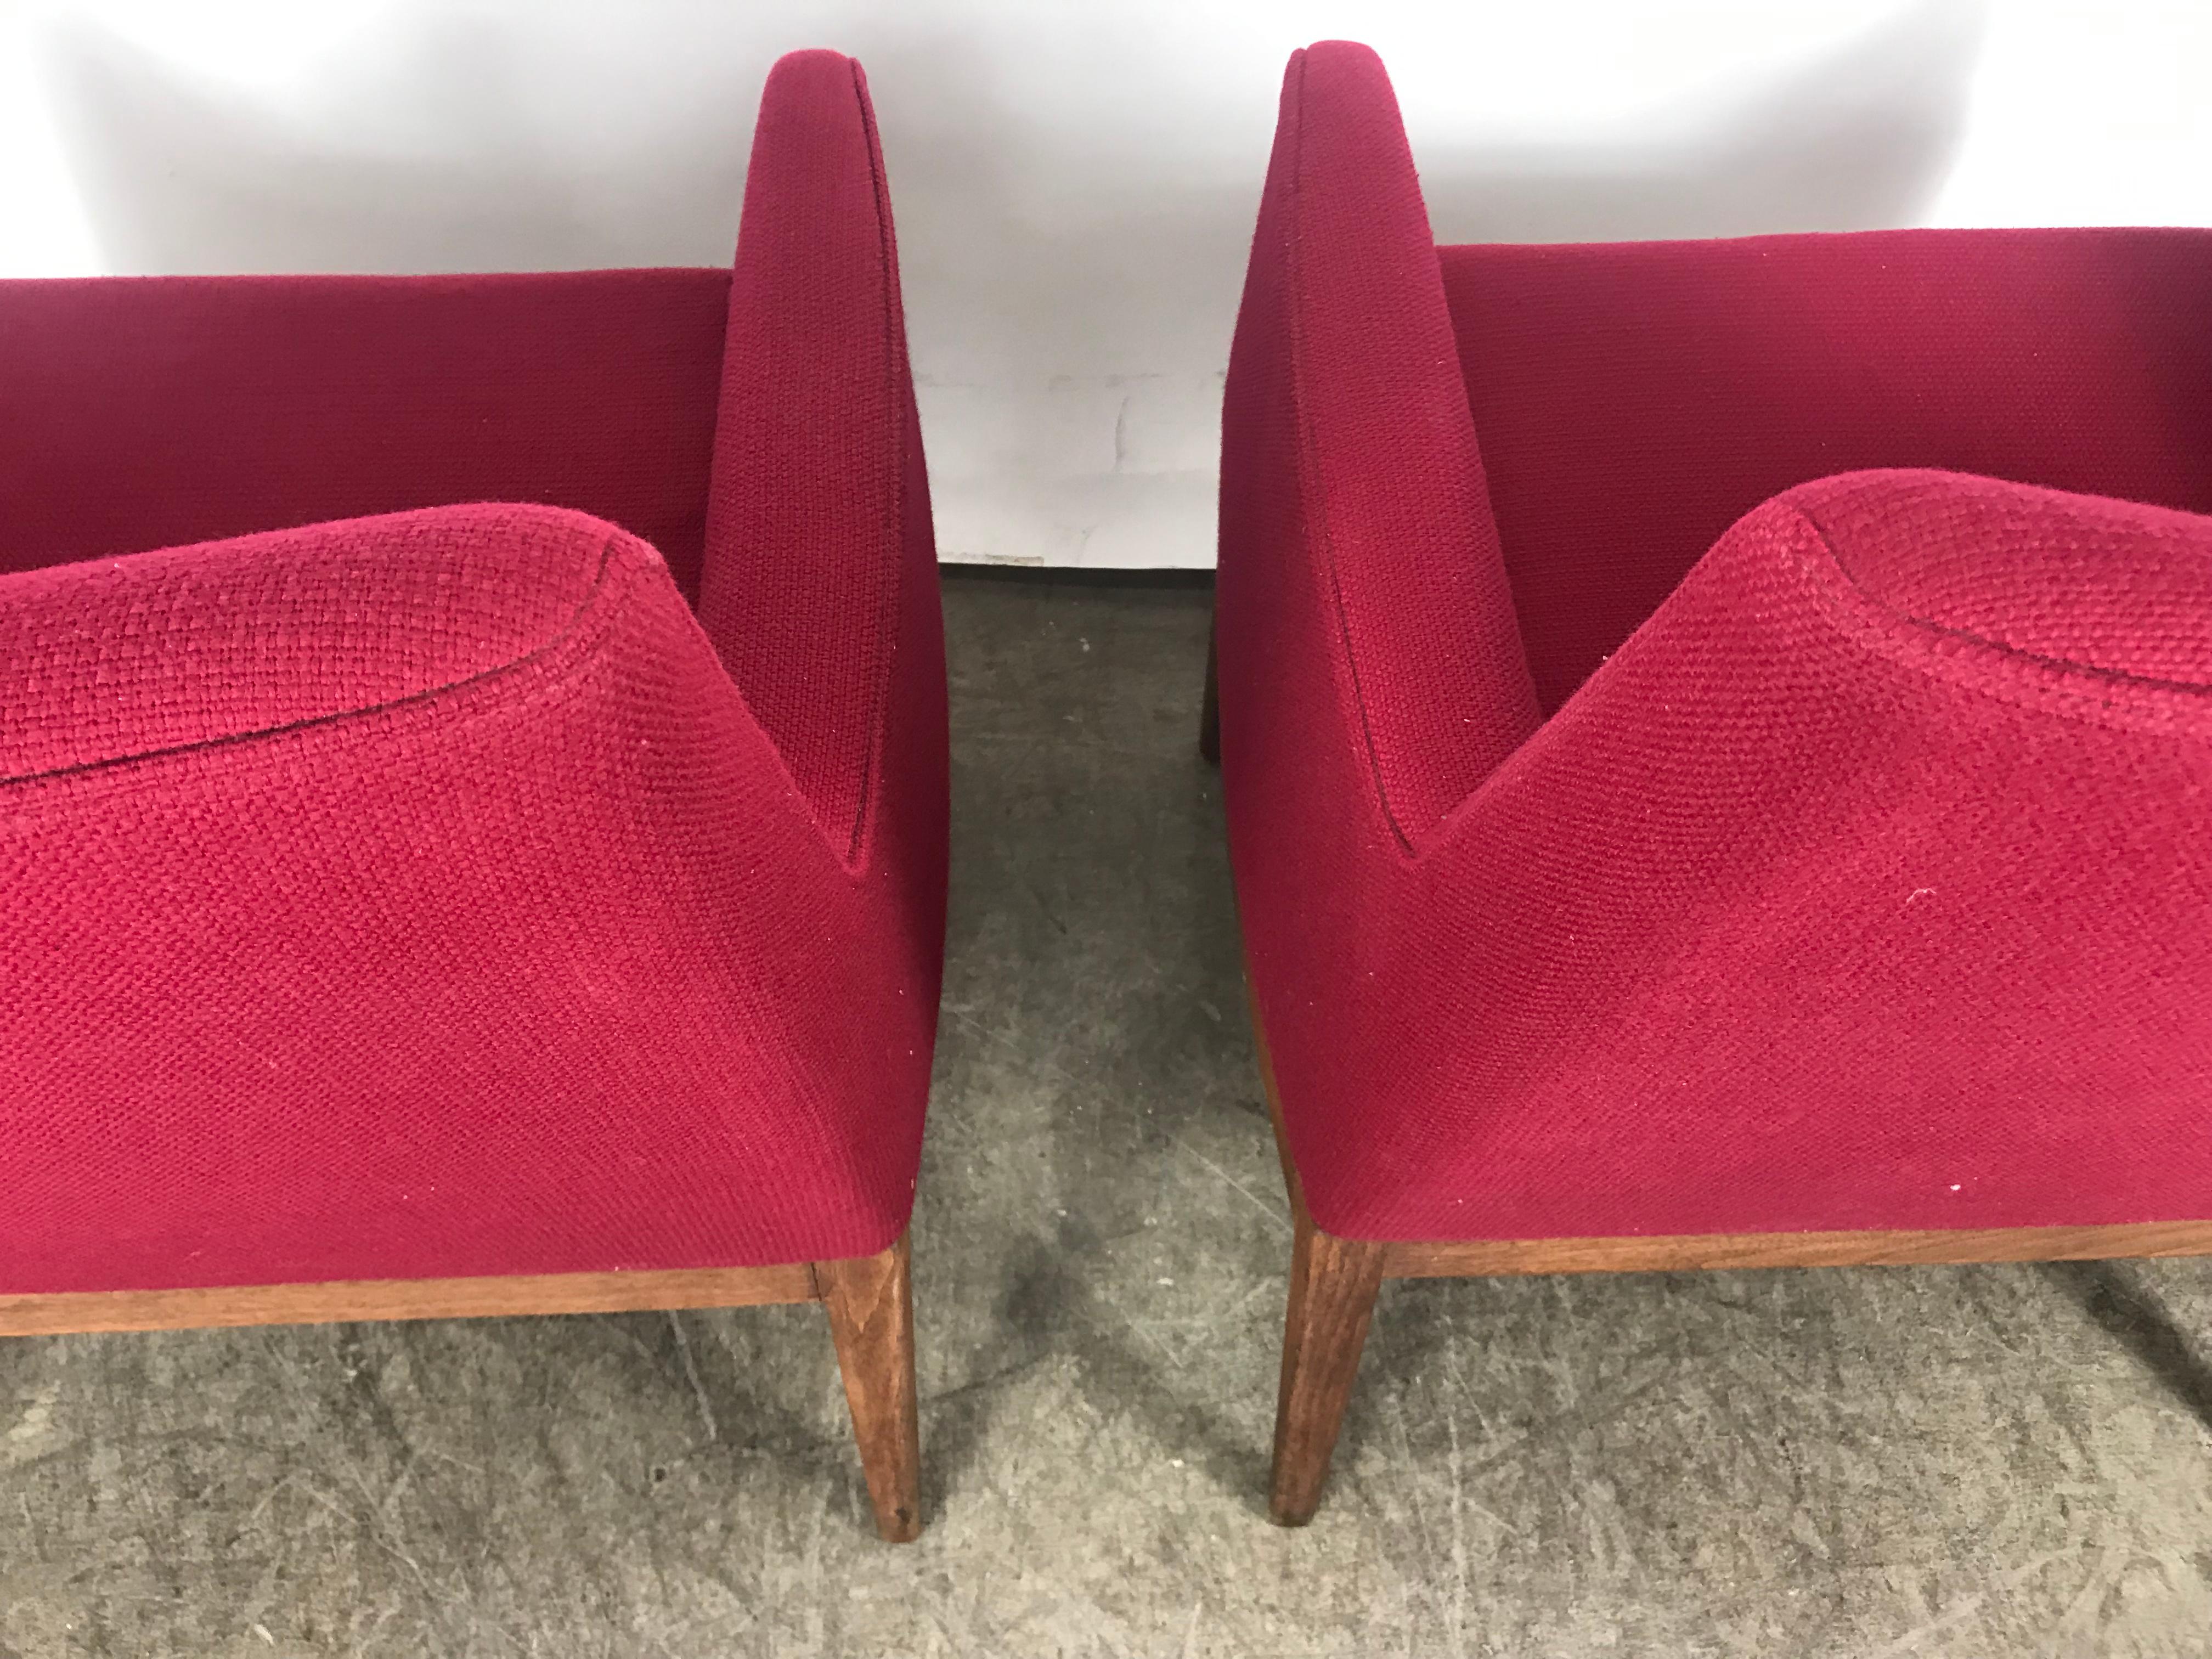 20th Century Classic Modernist Lounge Chairs Designed by Jens Risom, Jens Risom Design Inc